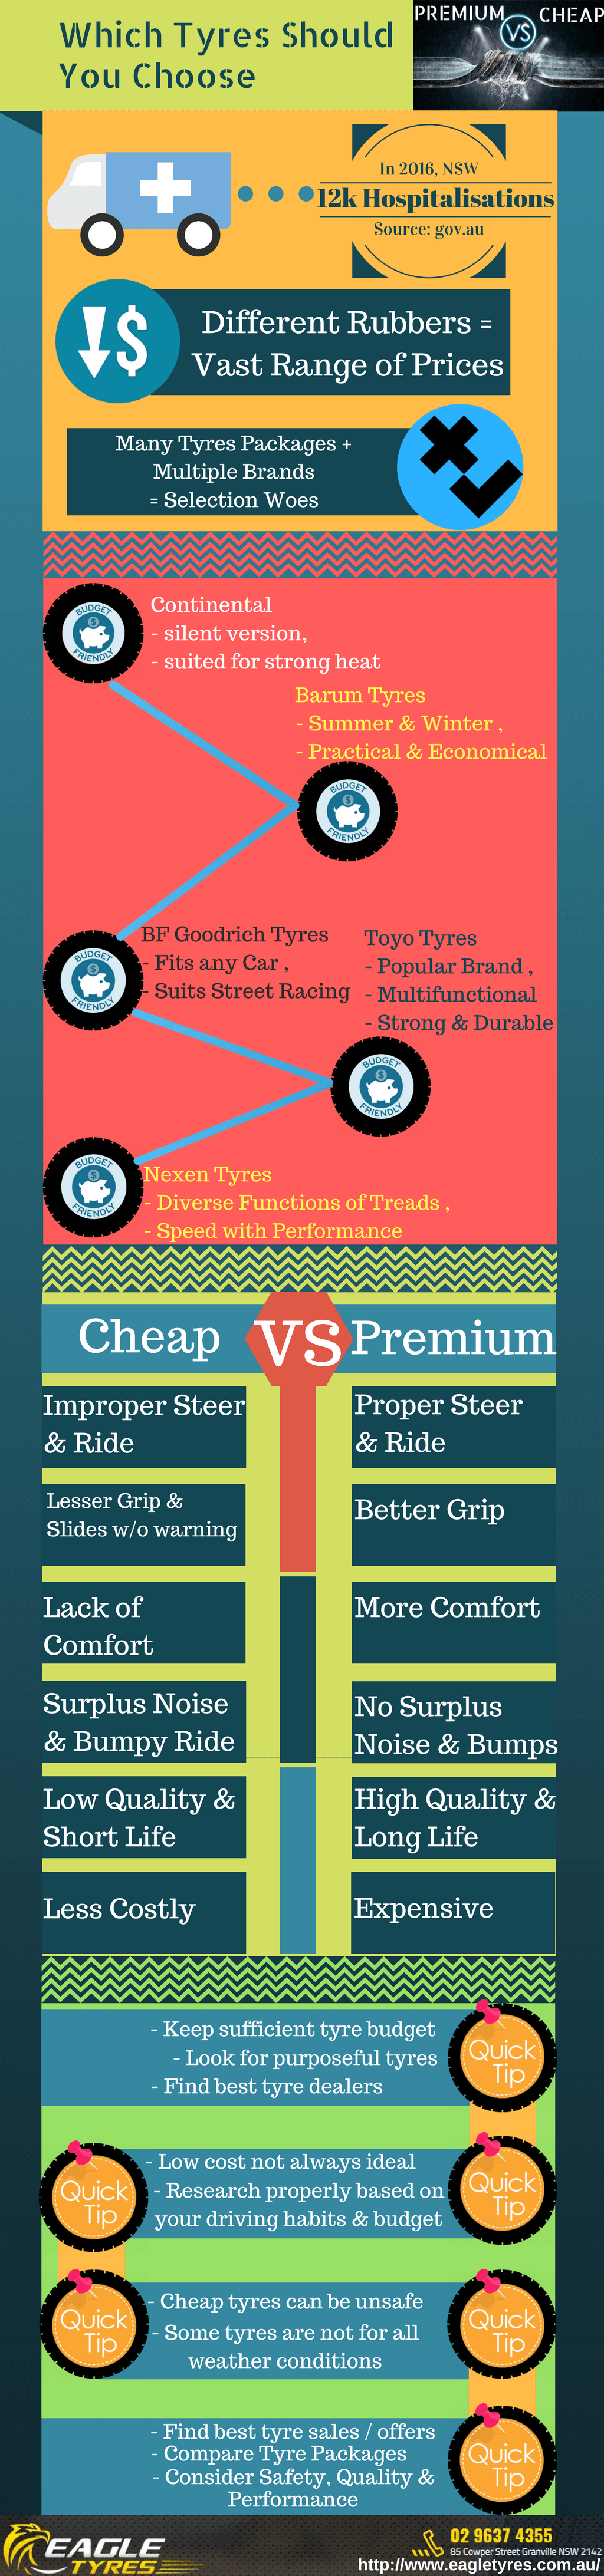 infographic_tyres